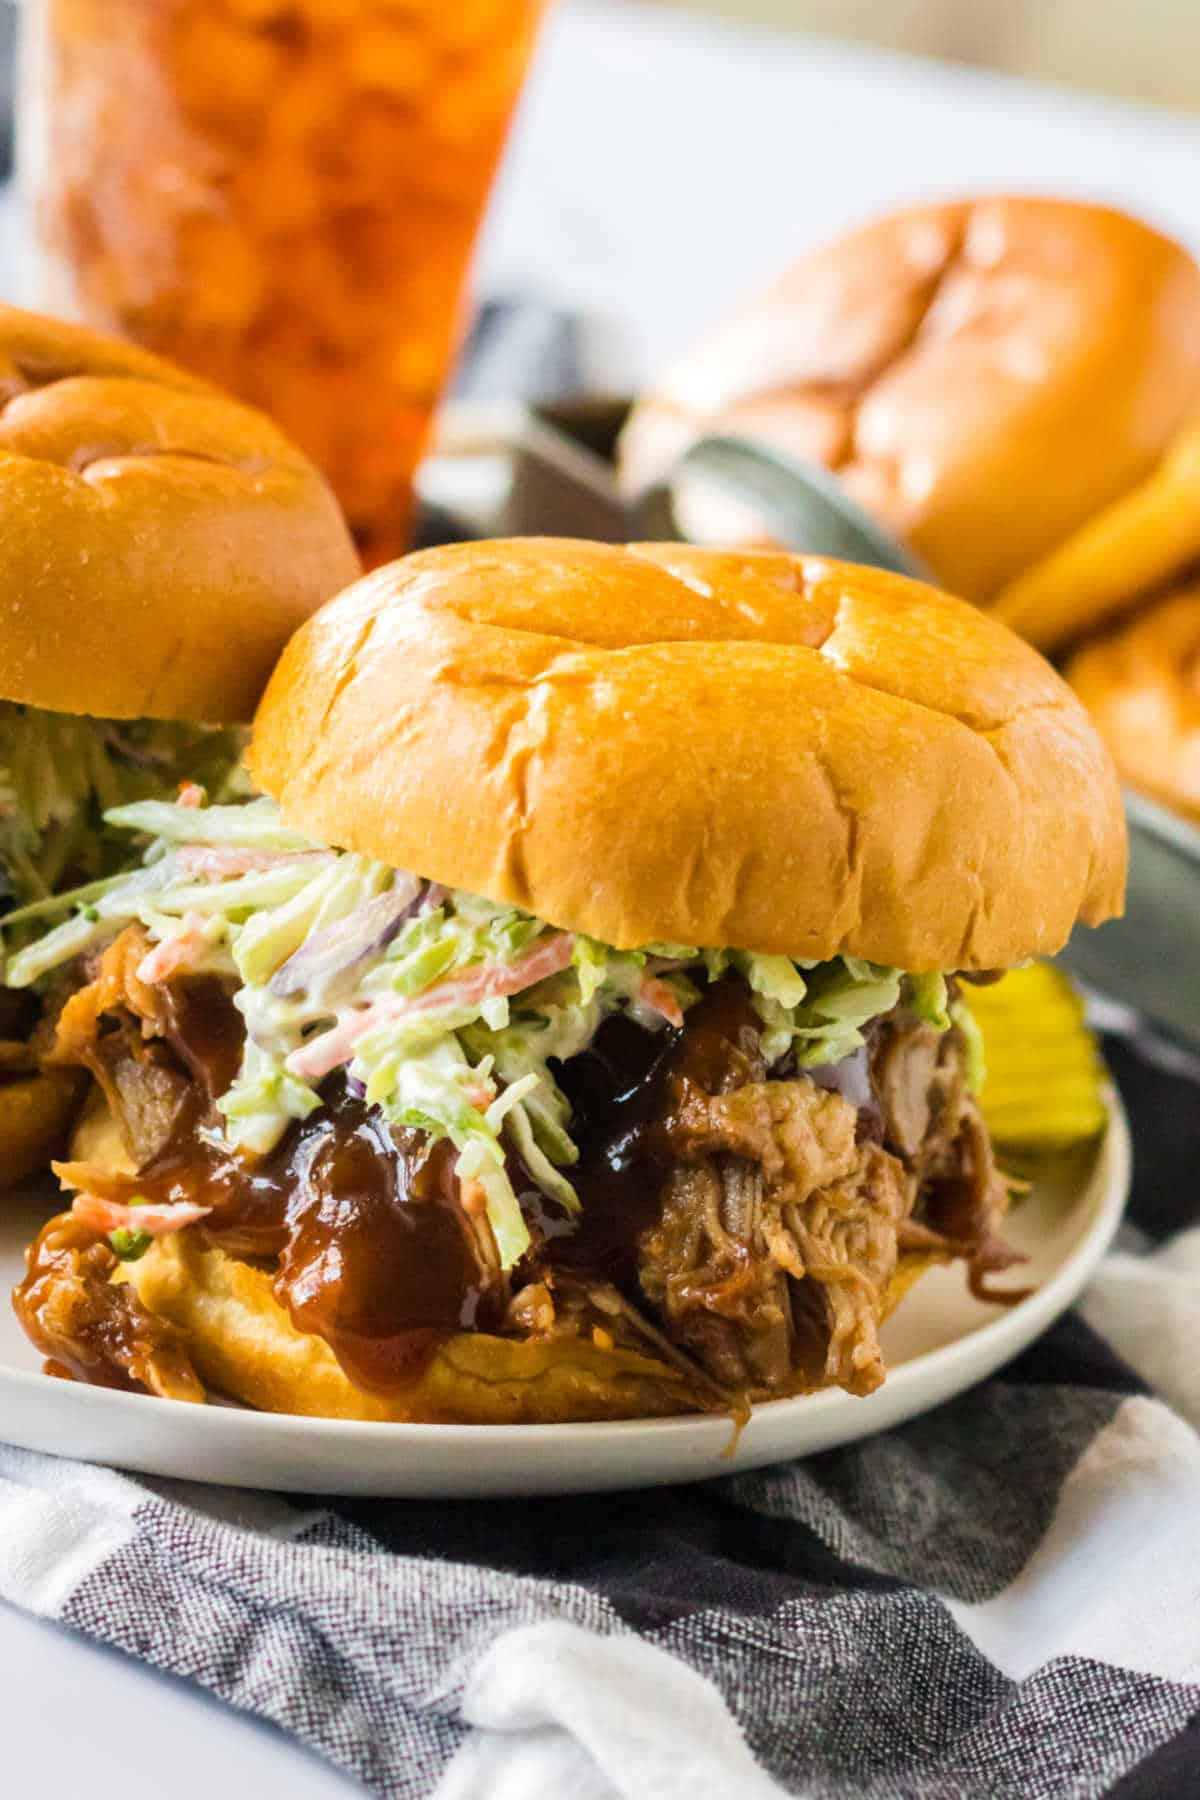 Root beer pulled pork and coleslaw on a bun on a plate.